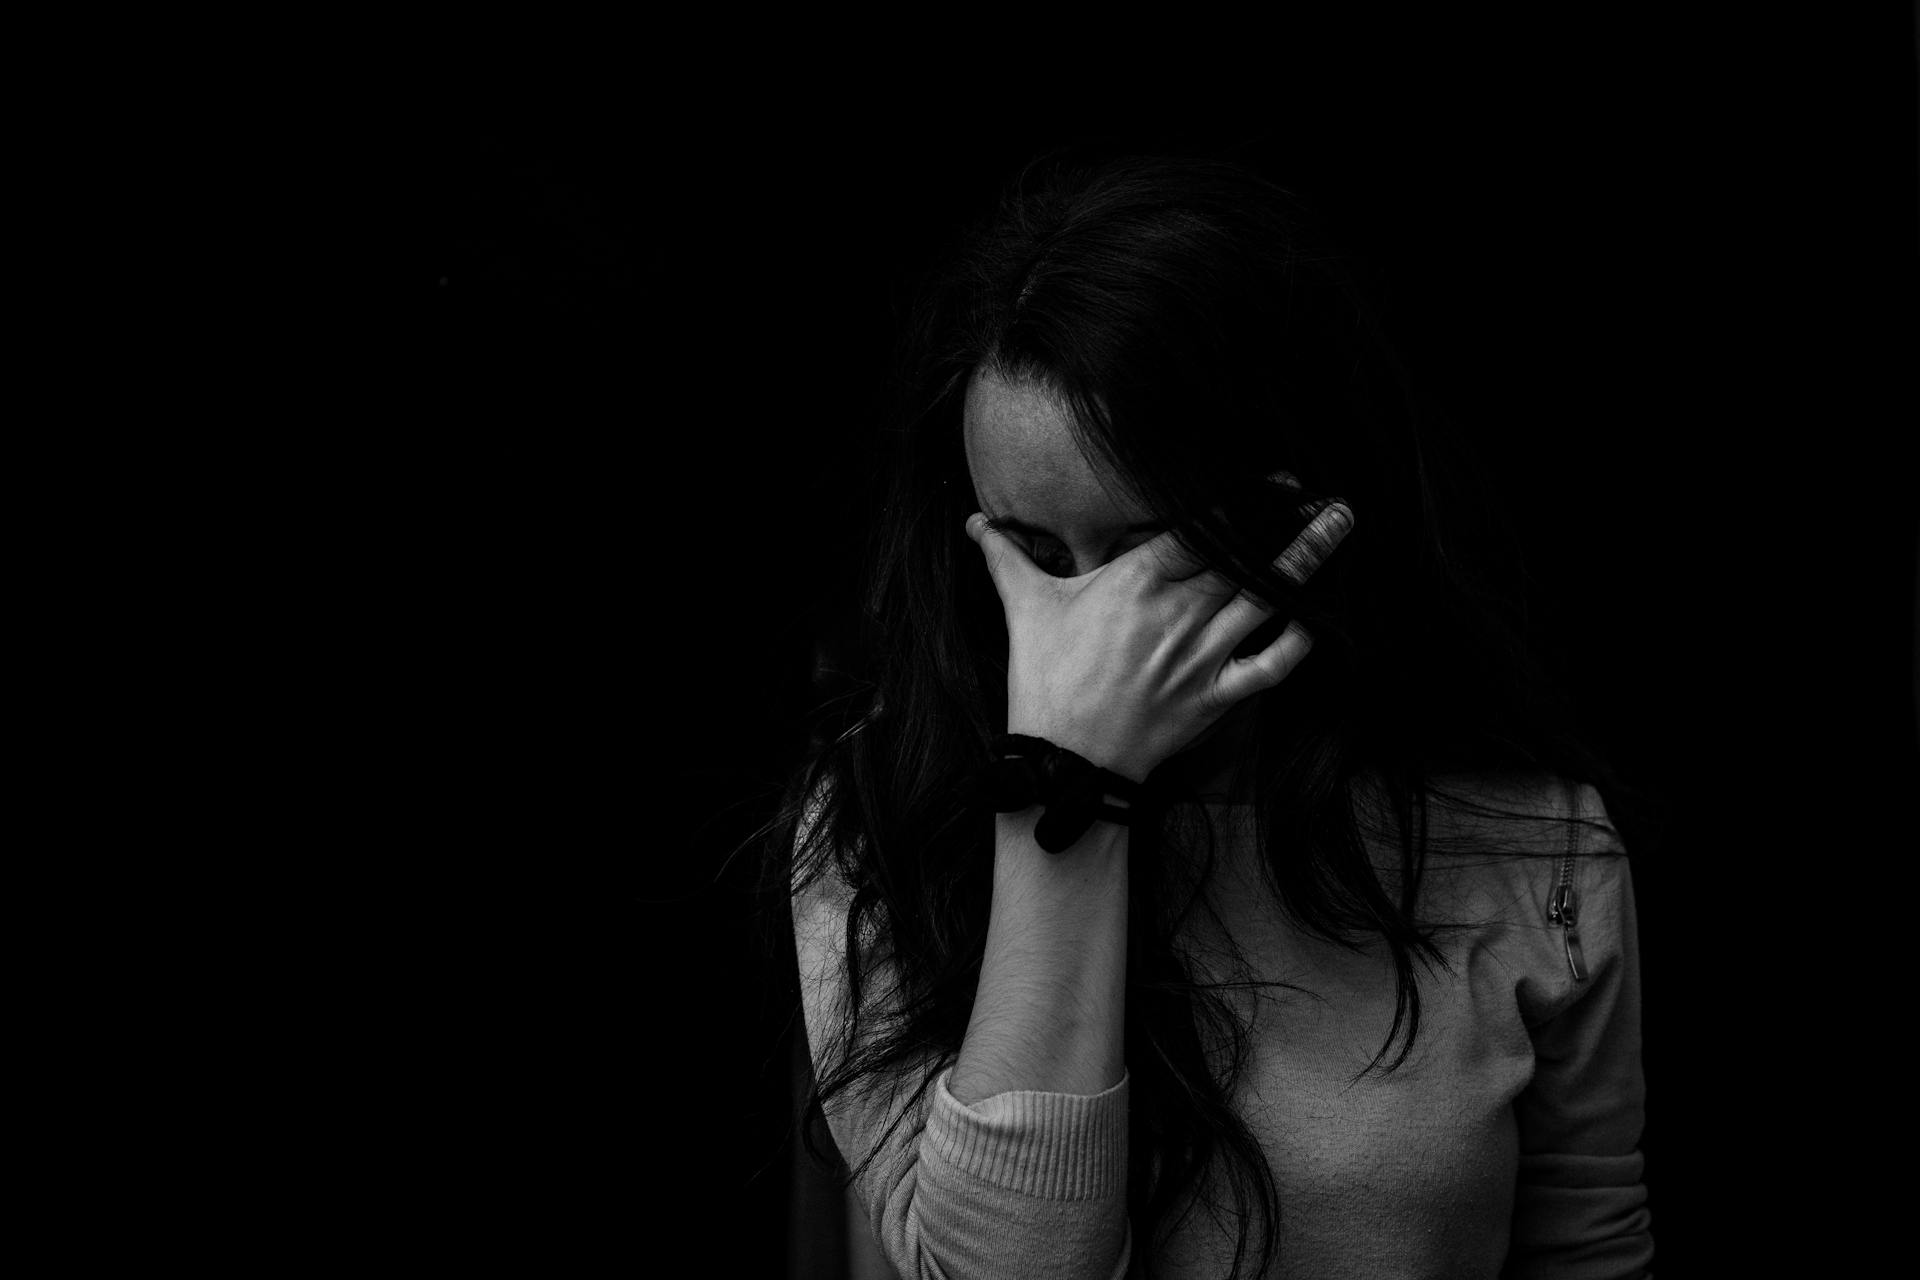 An upset girl holding her face | Source: Pexels